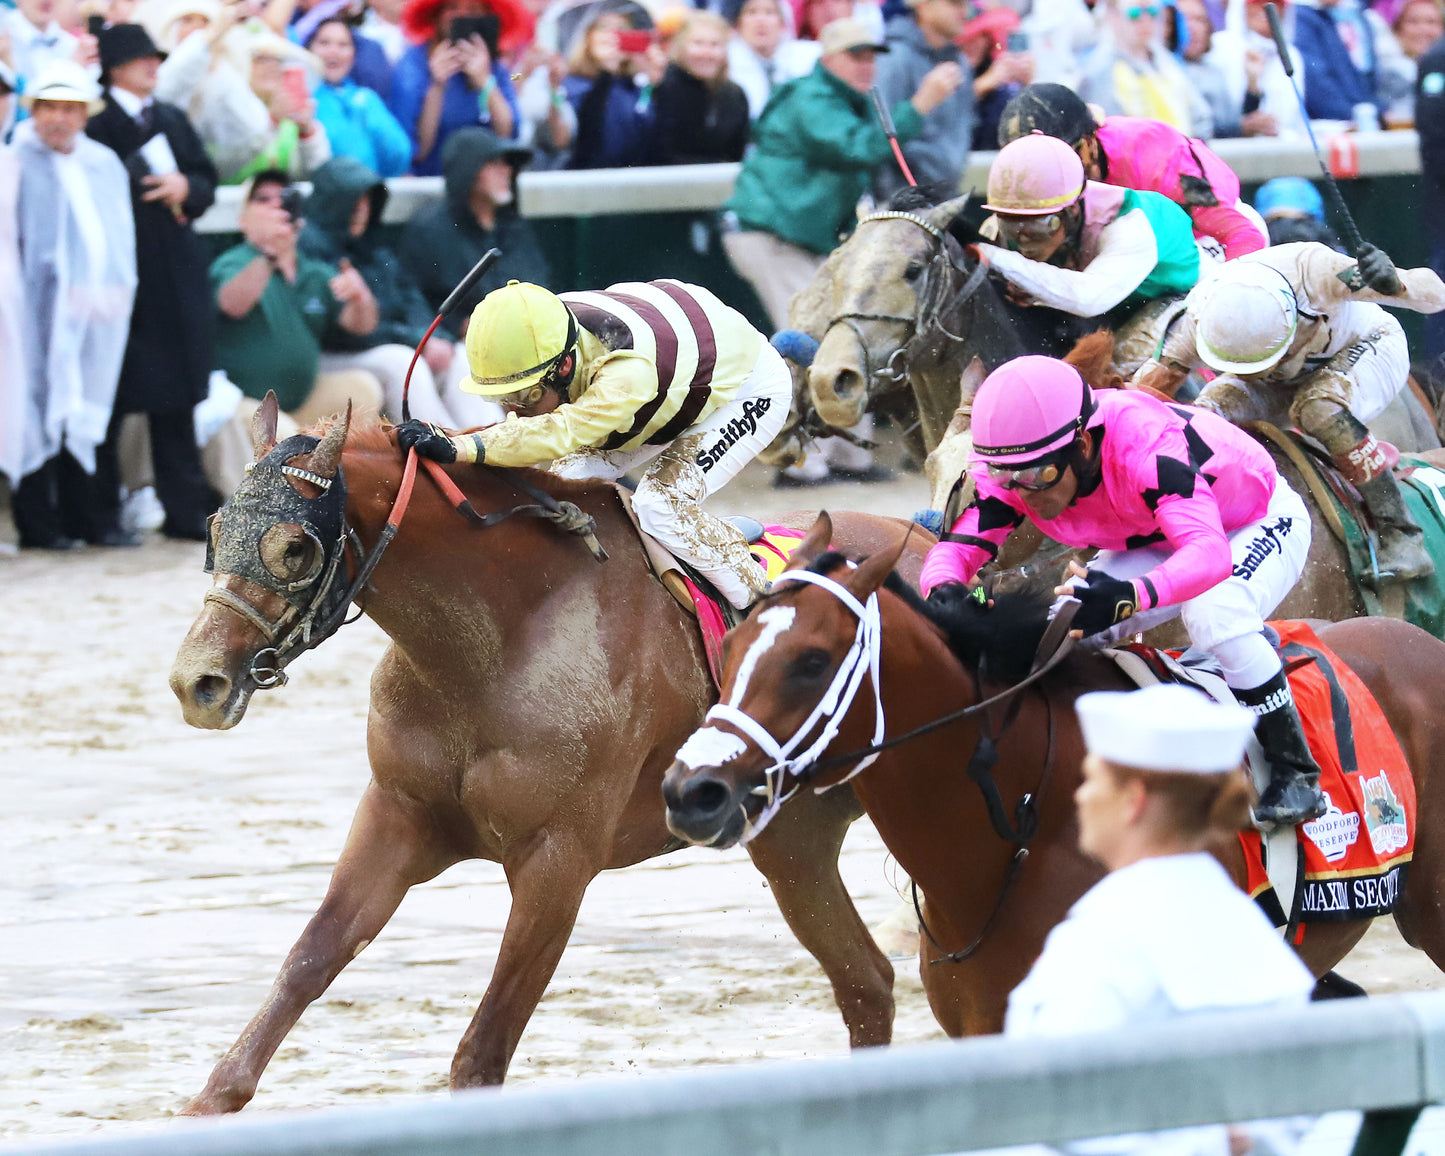 COUNTRY HOUSE - The Kentucky Derby - 145th Running - 05-04-19 - R12 - CD - Inside Finish 01